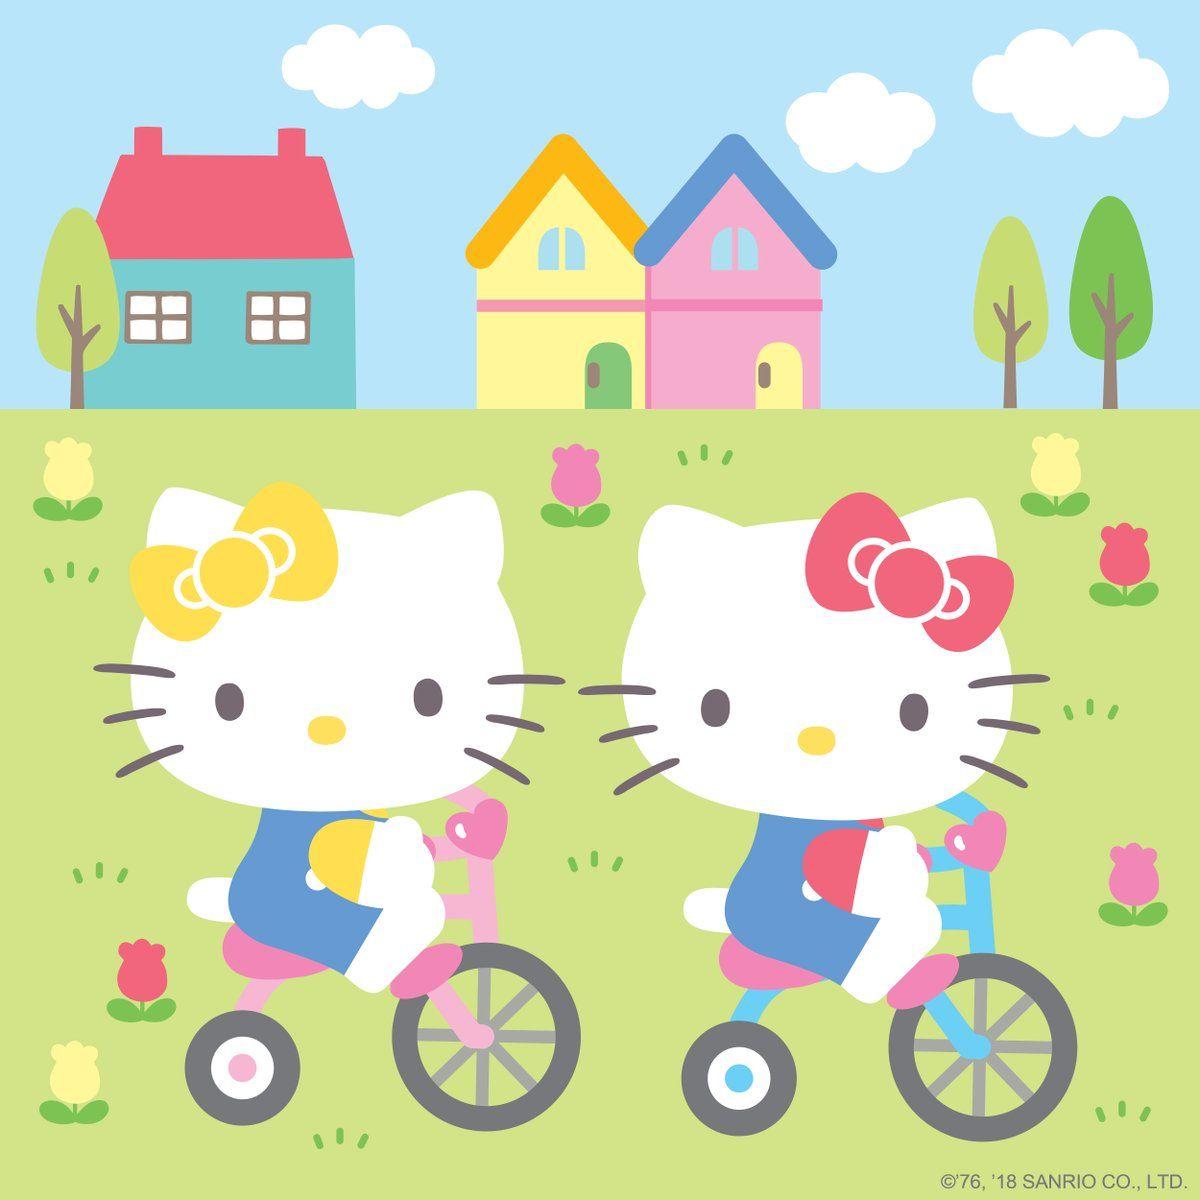 Happy National Siblings Day! Hello Kitty's twin sister, Mimmy looks